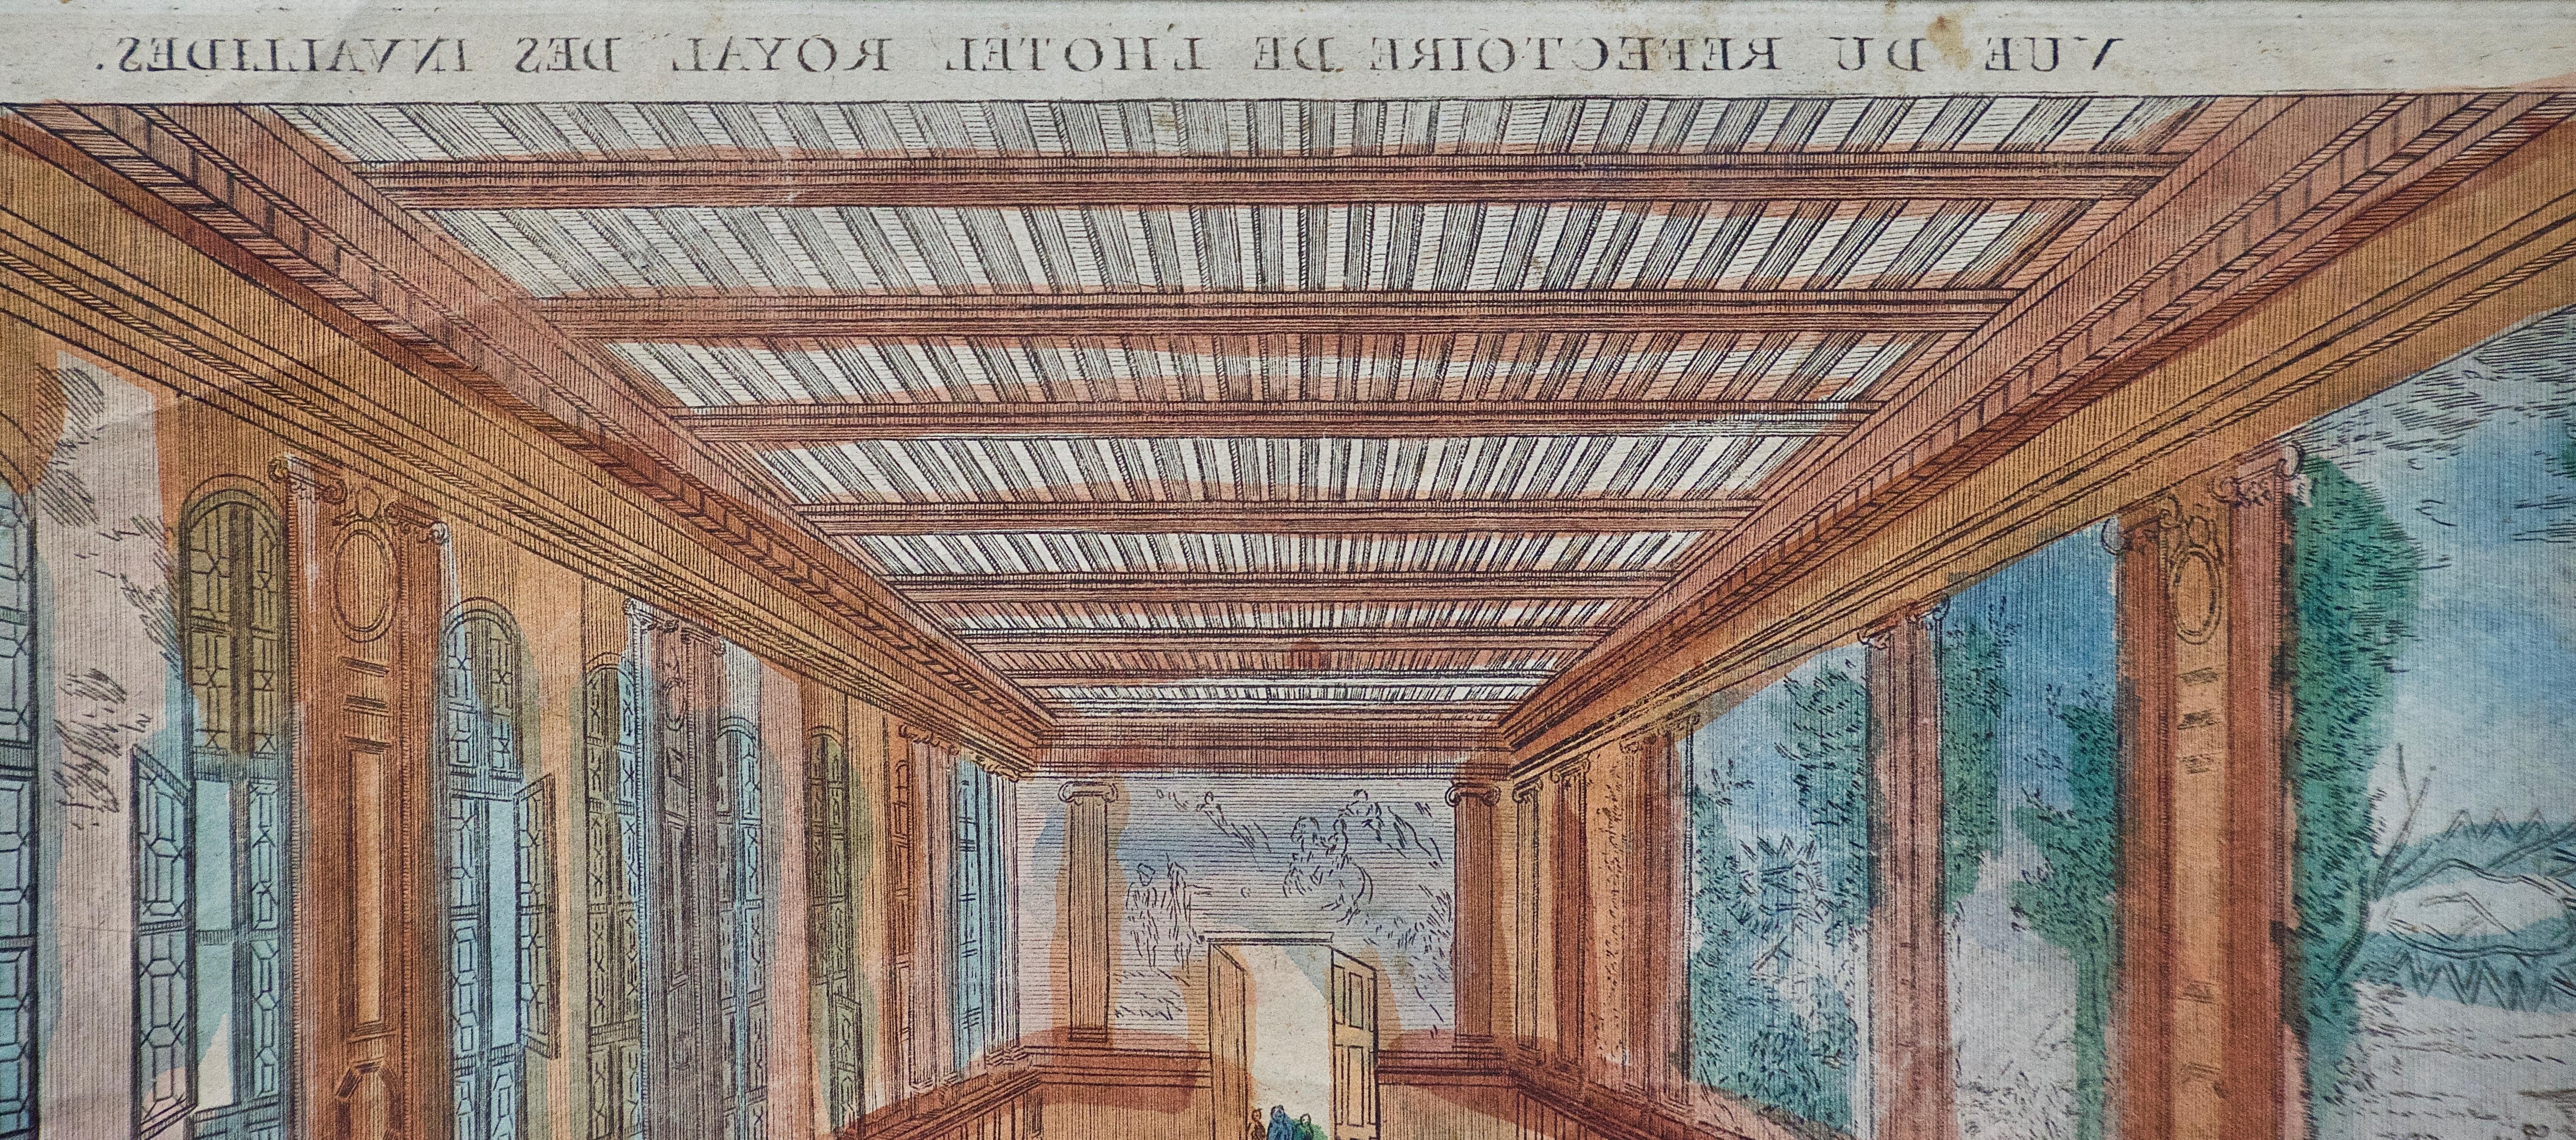 Hand Colored Vue d'optique of the Hotel des Invalides Dining Room in Paris - Other Art Style Print by Jacques Chereau